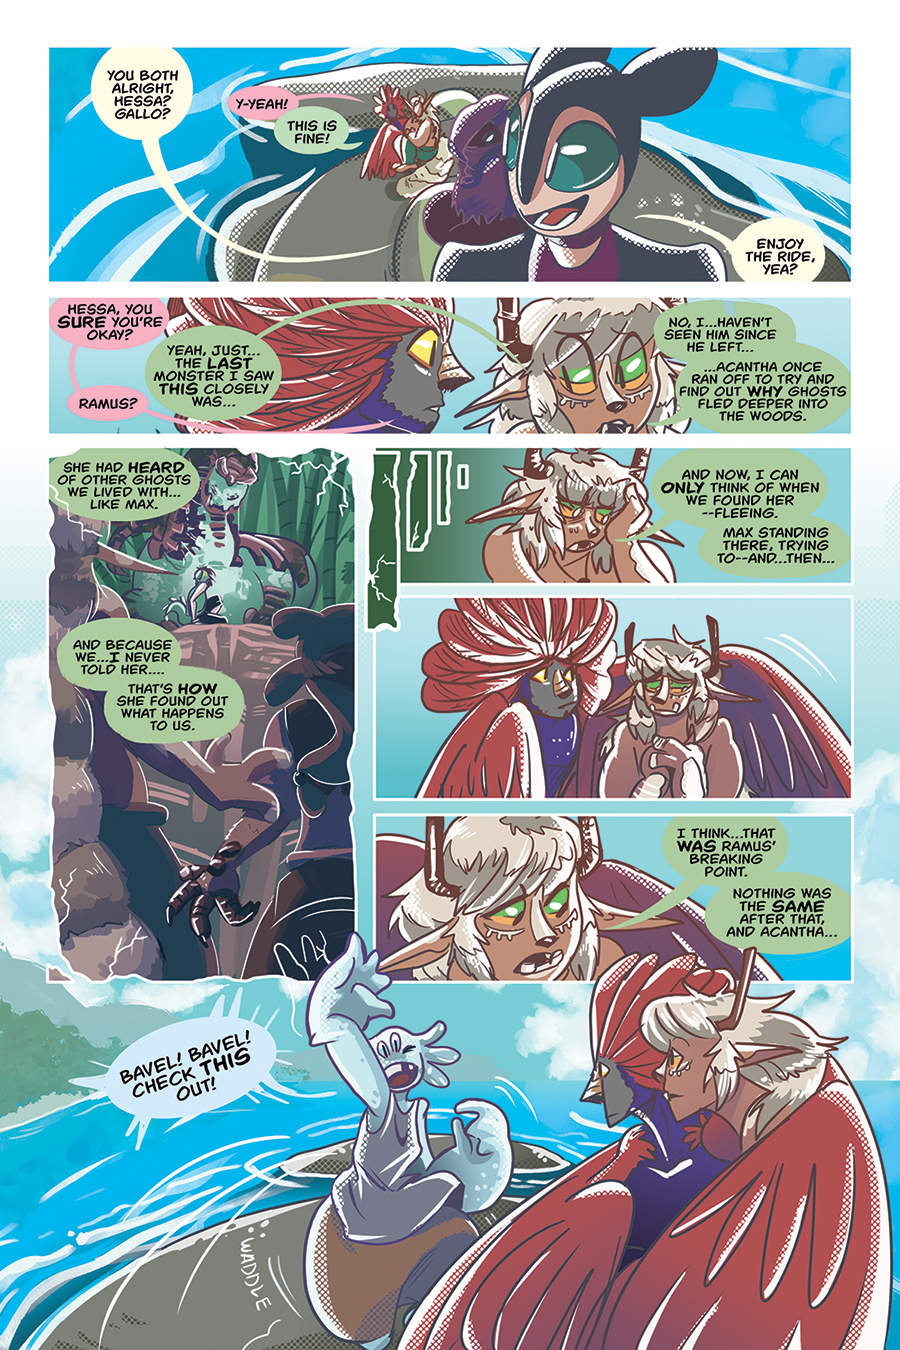 Gone Fishing 006, page 9